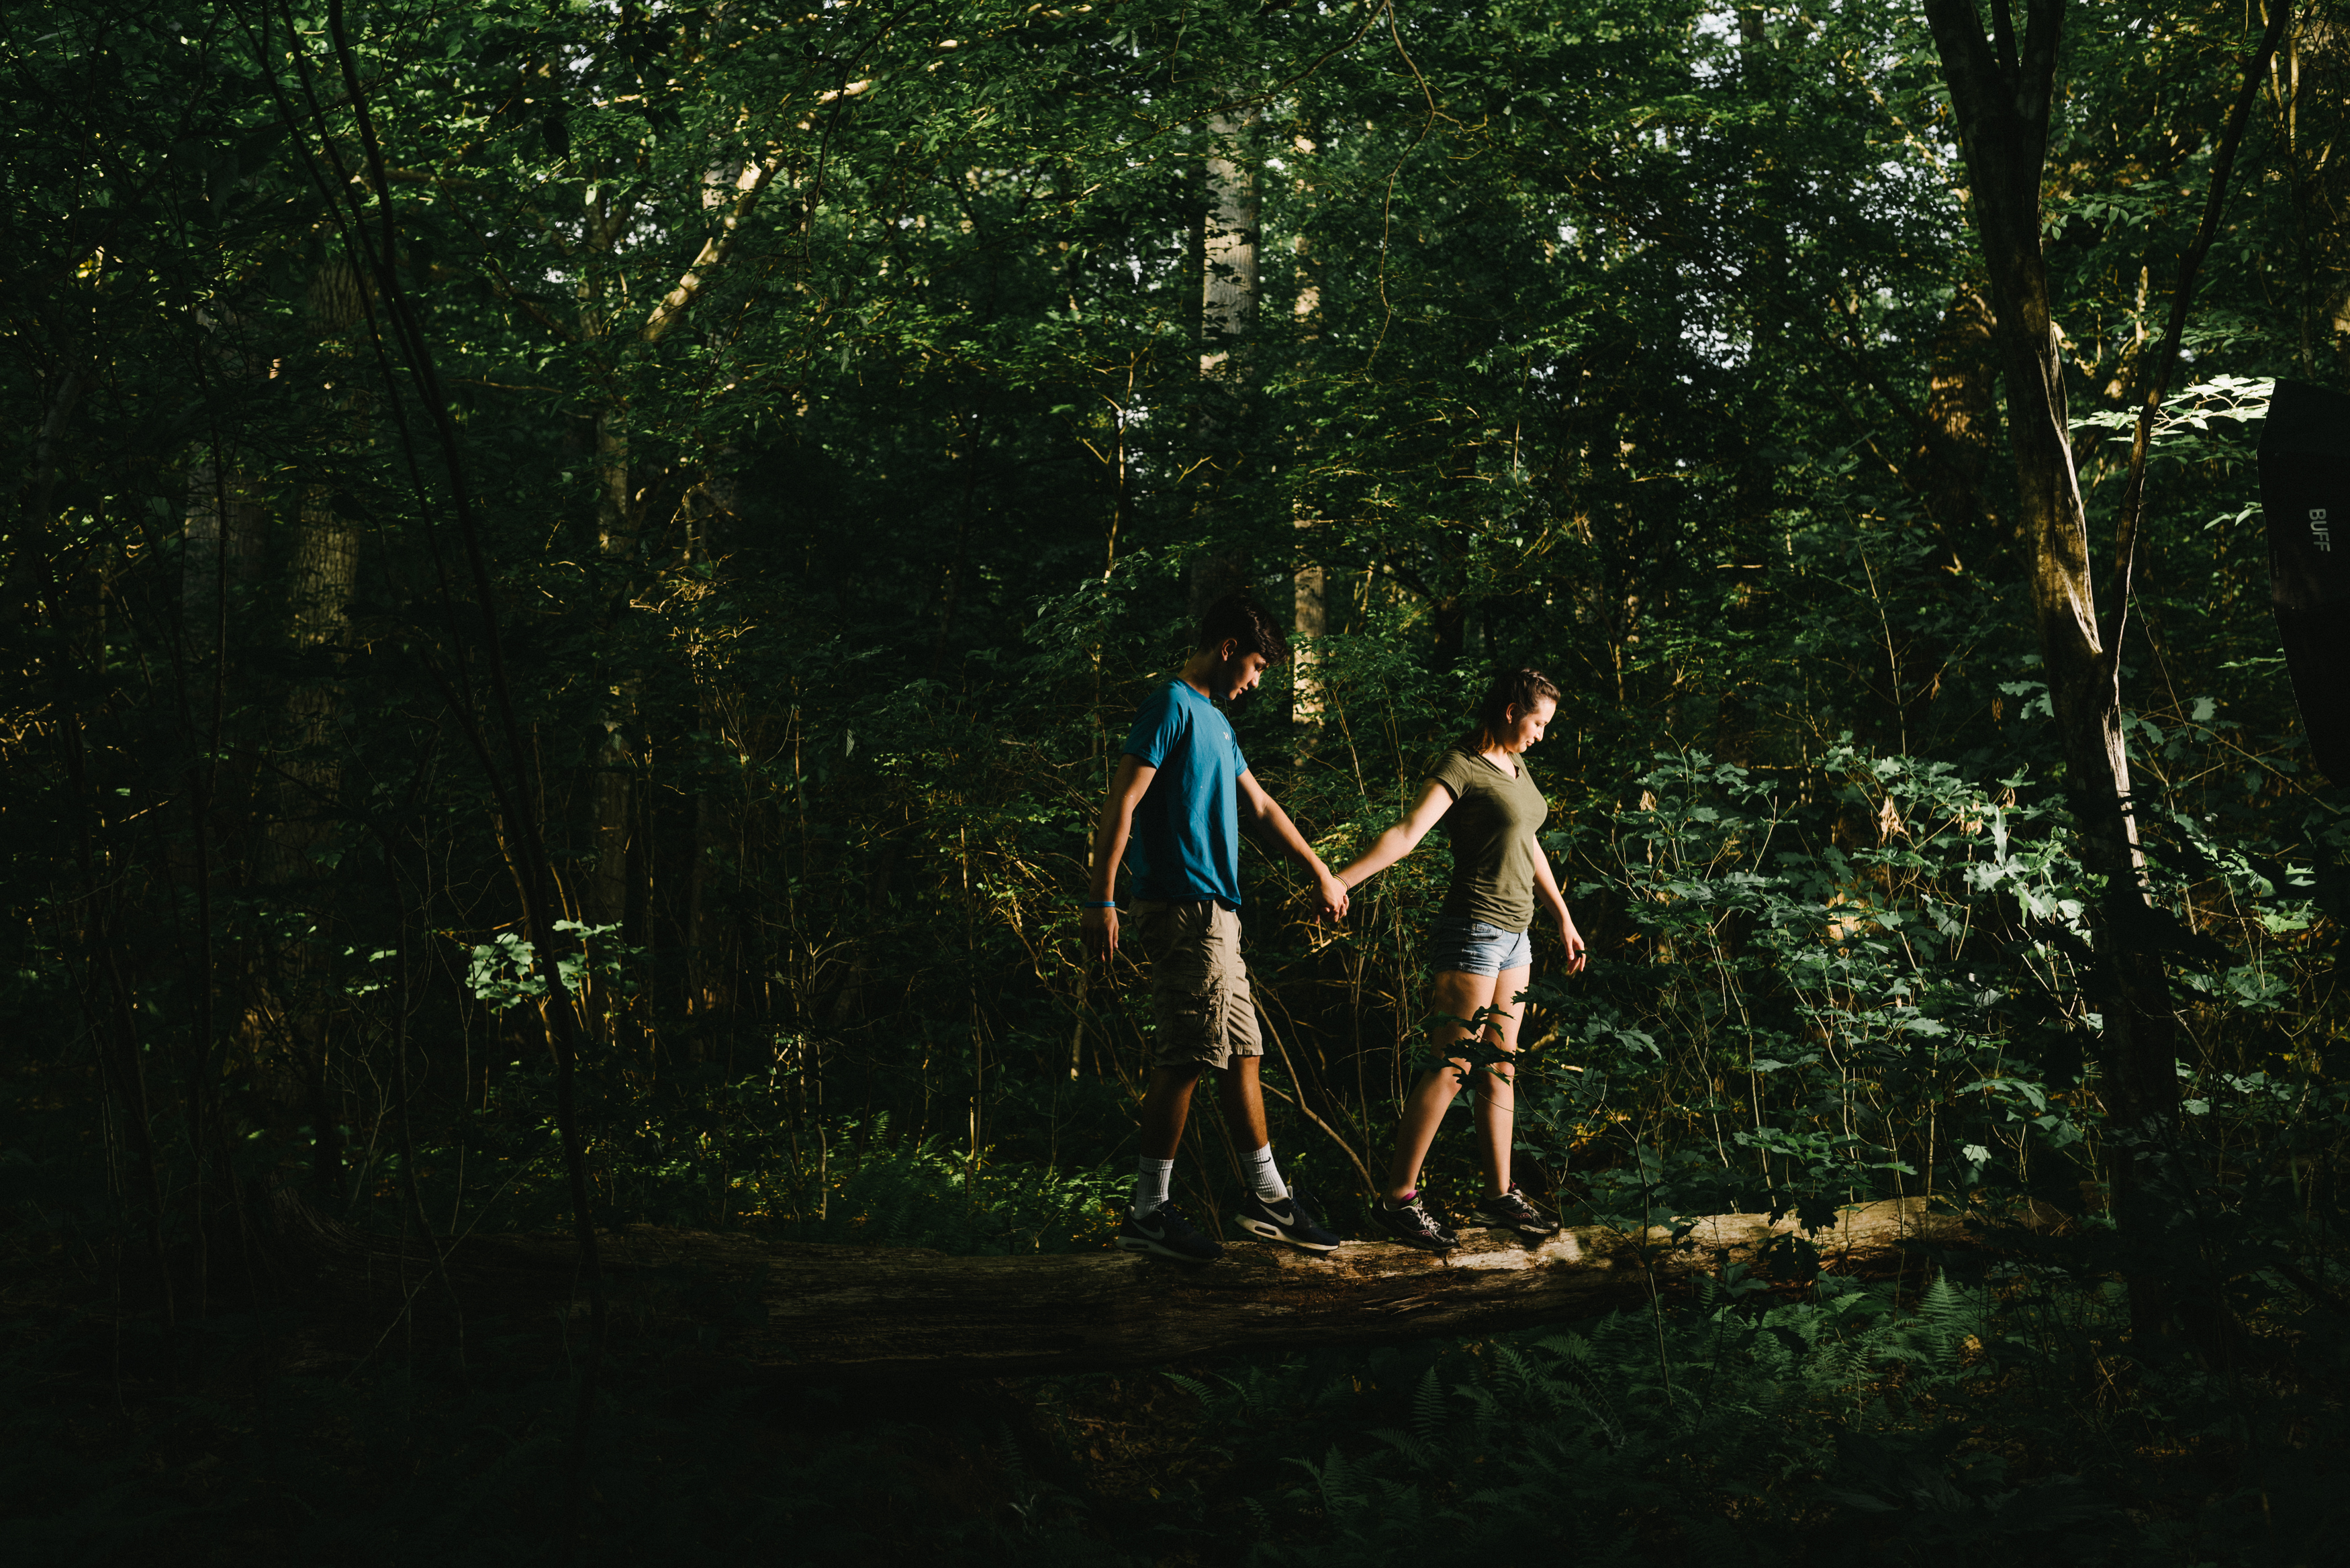 A young man and young woman walking on a log, holding hands in the forest